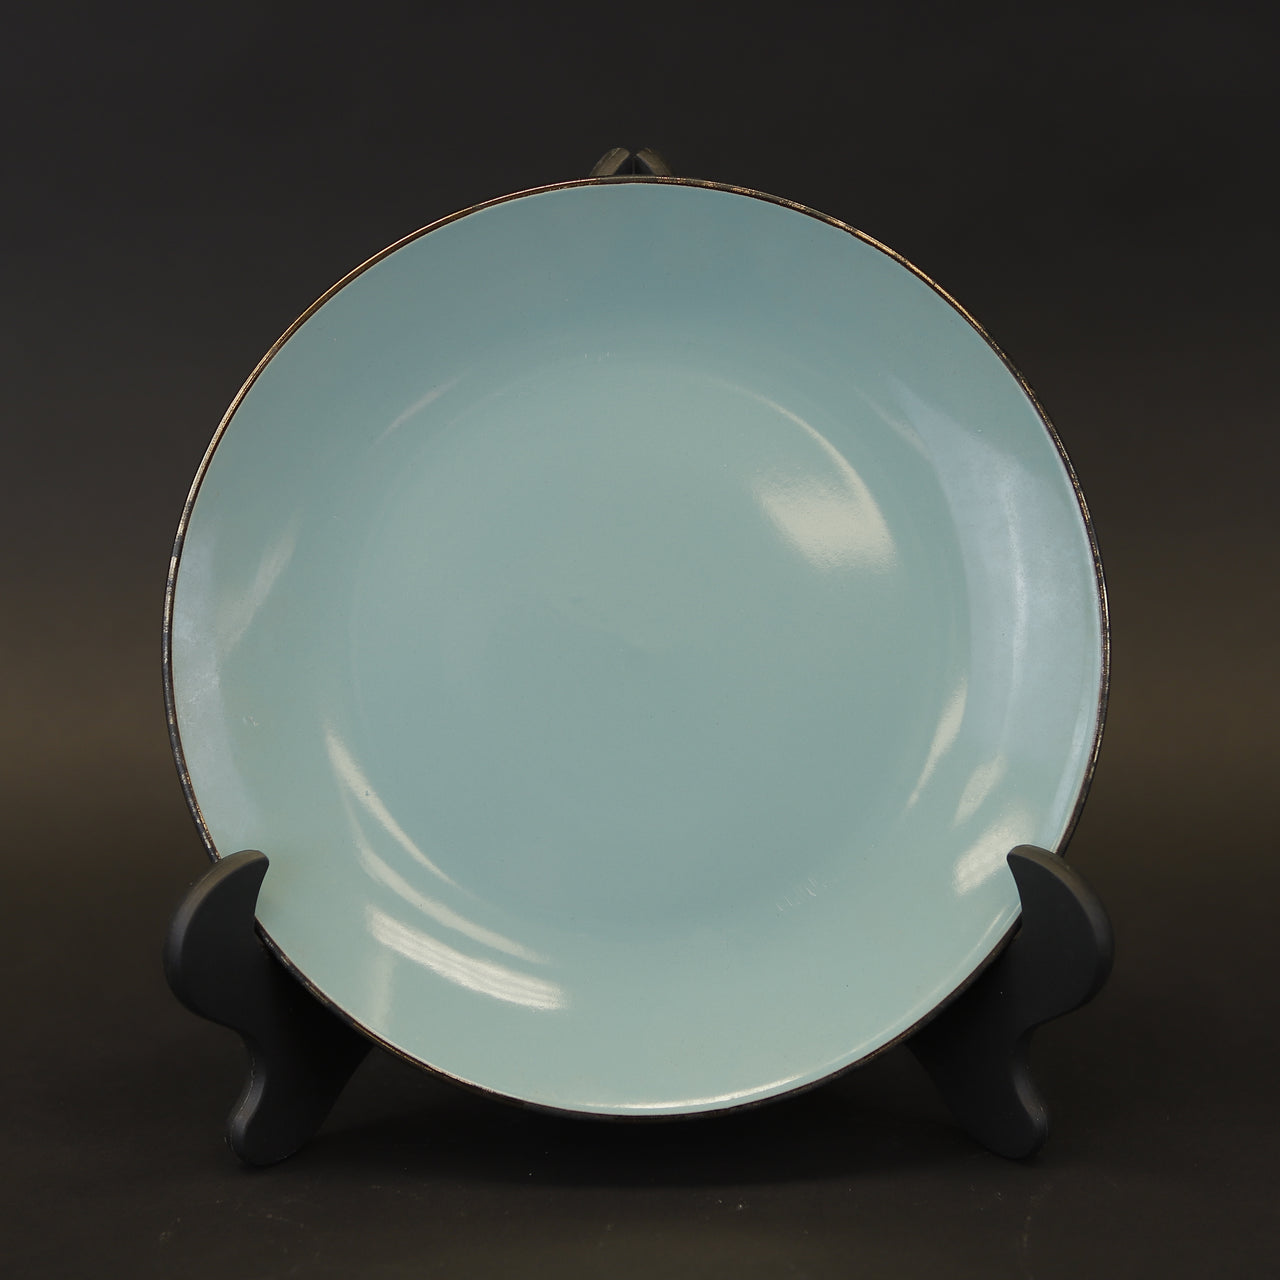 HCCH8068 - Turquoise Stone Dinner Plate